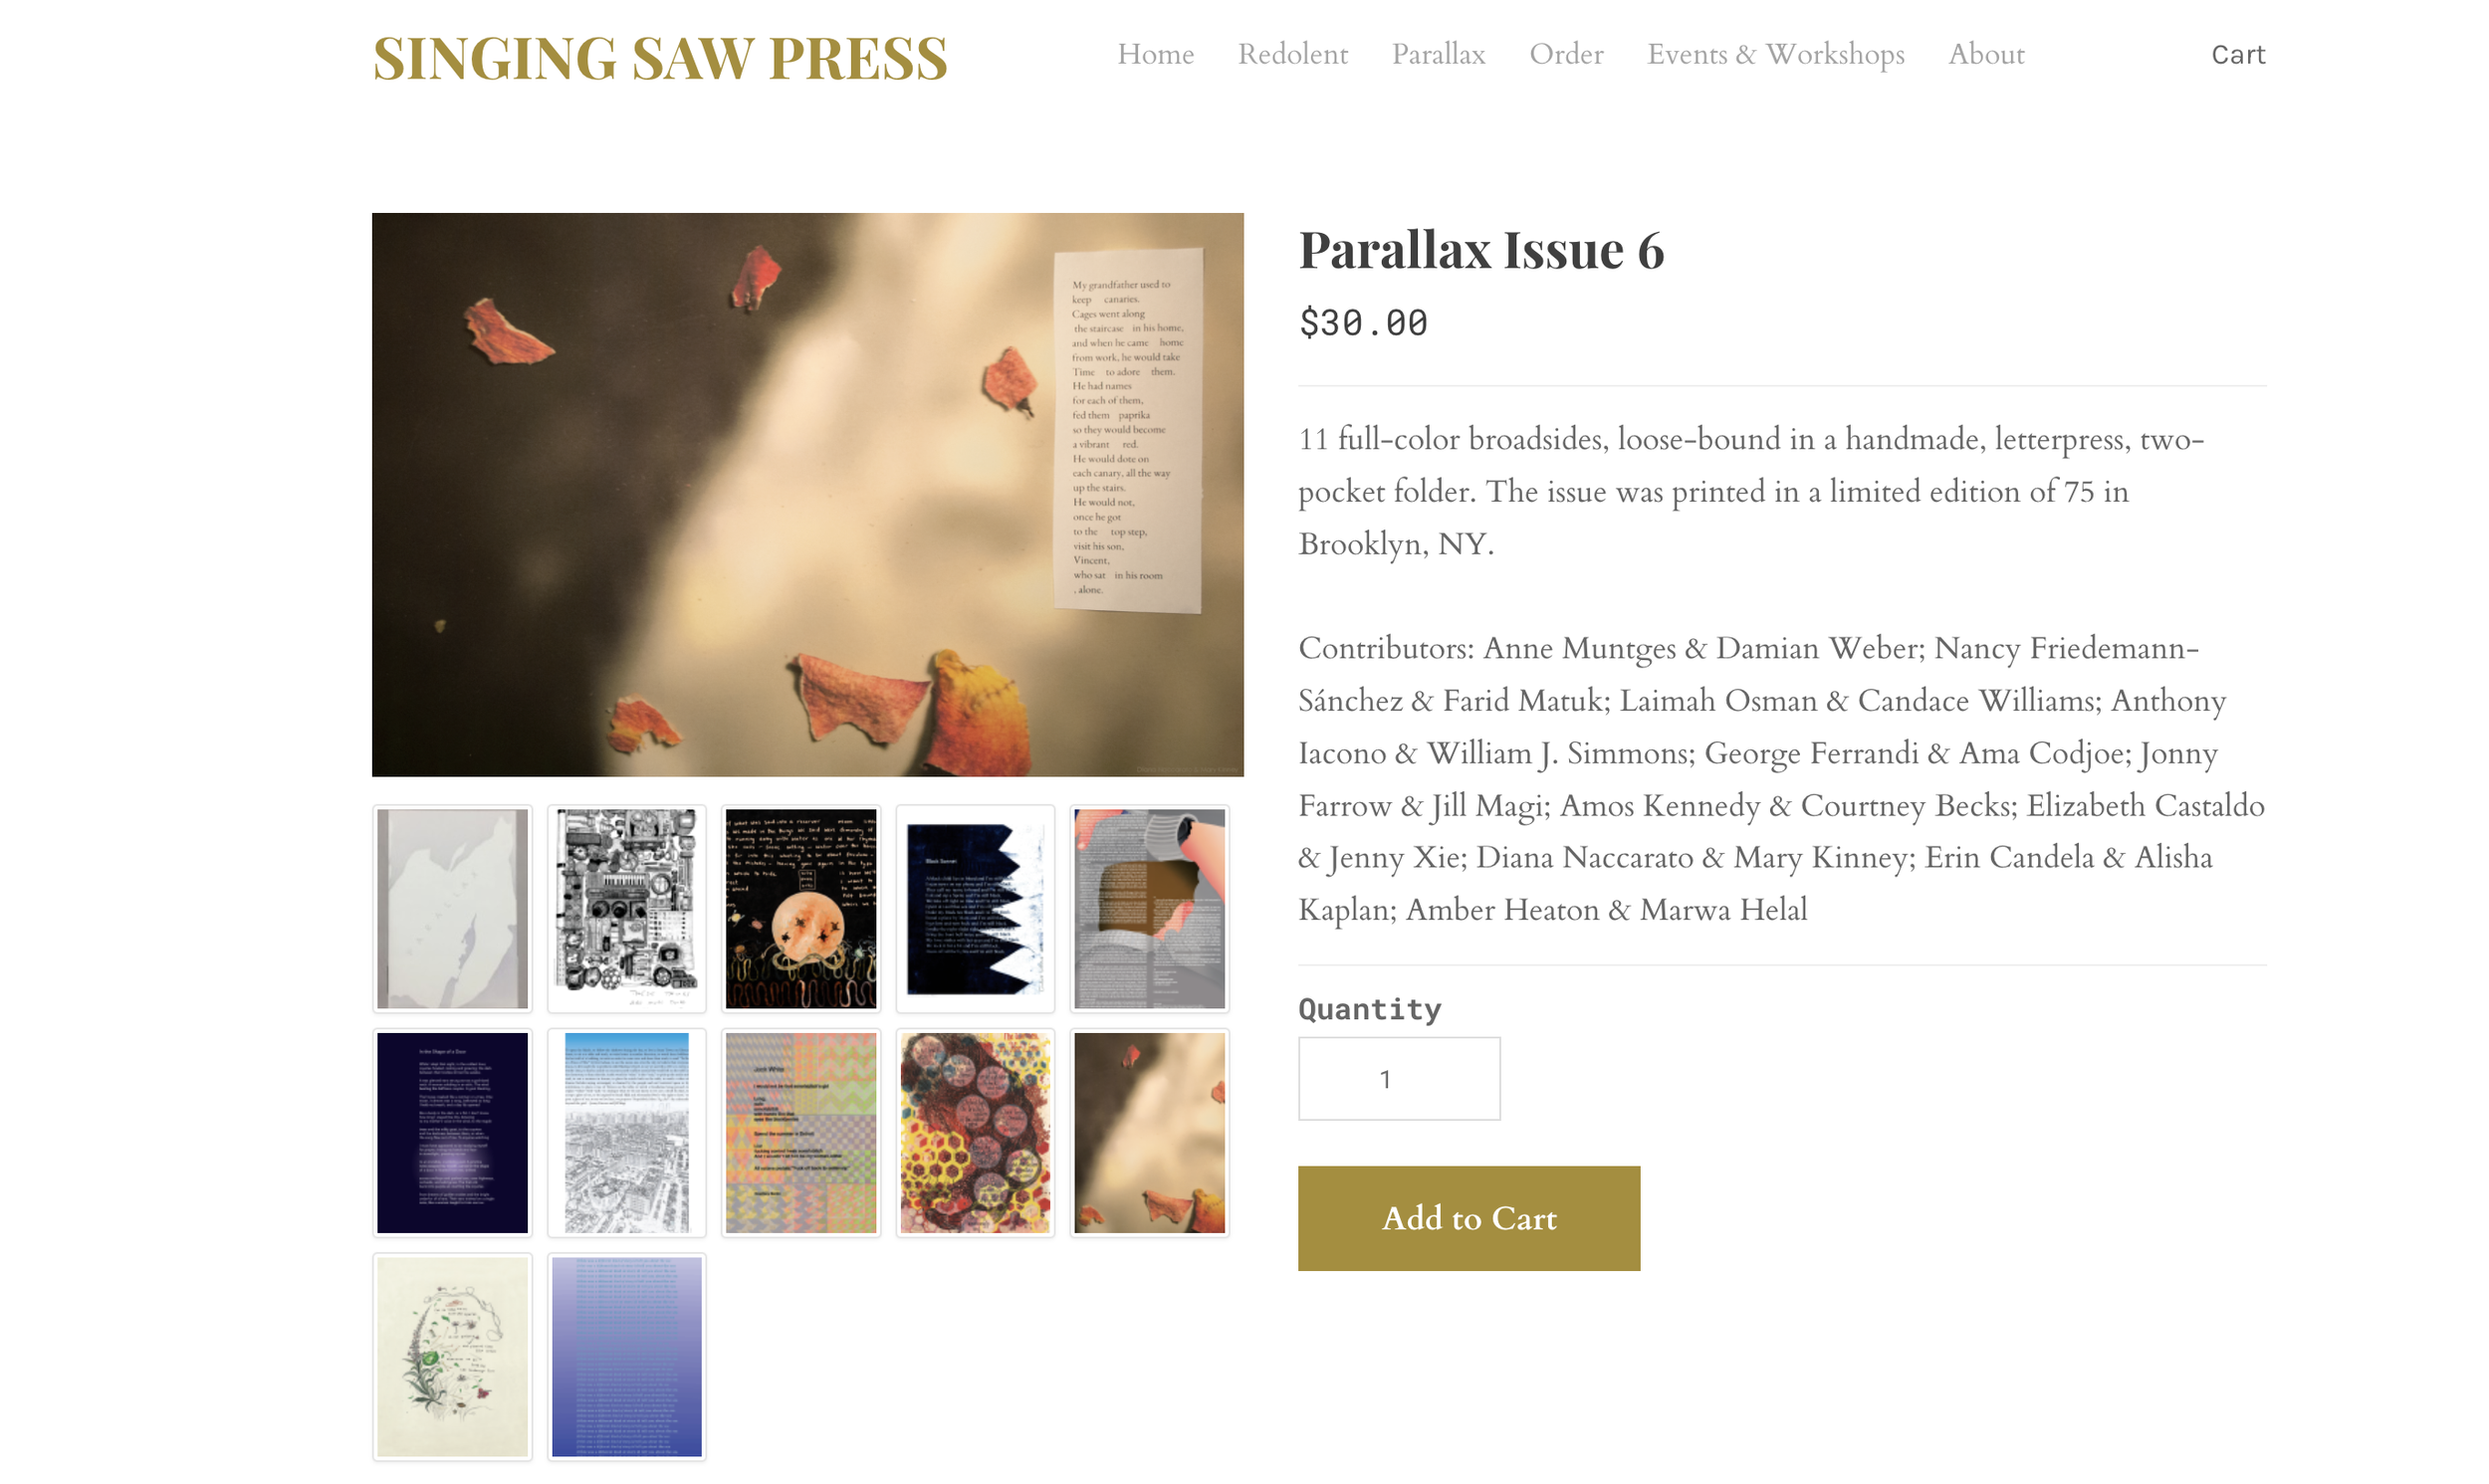 Collaboration with Mary Kinney, Parallax Issue 6